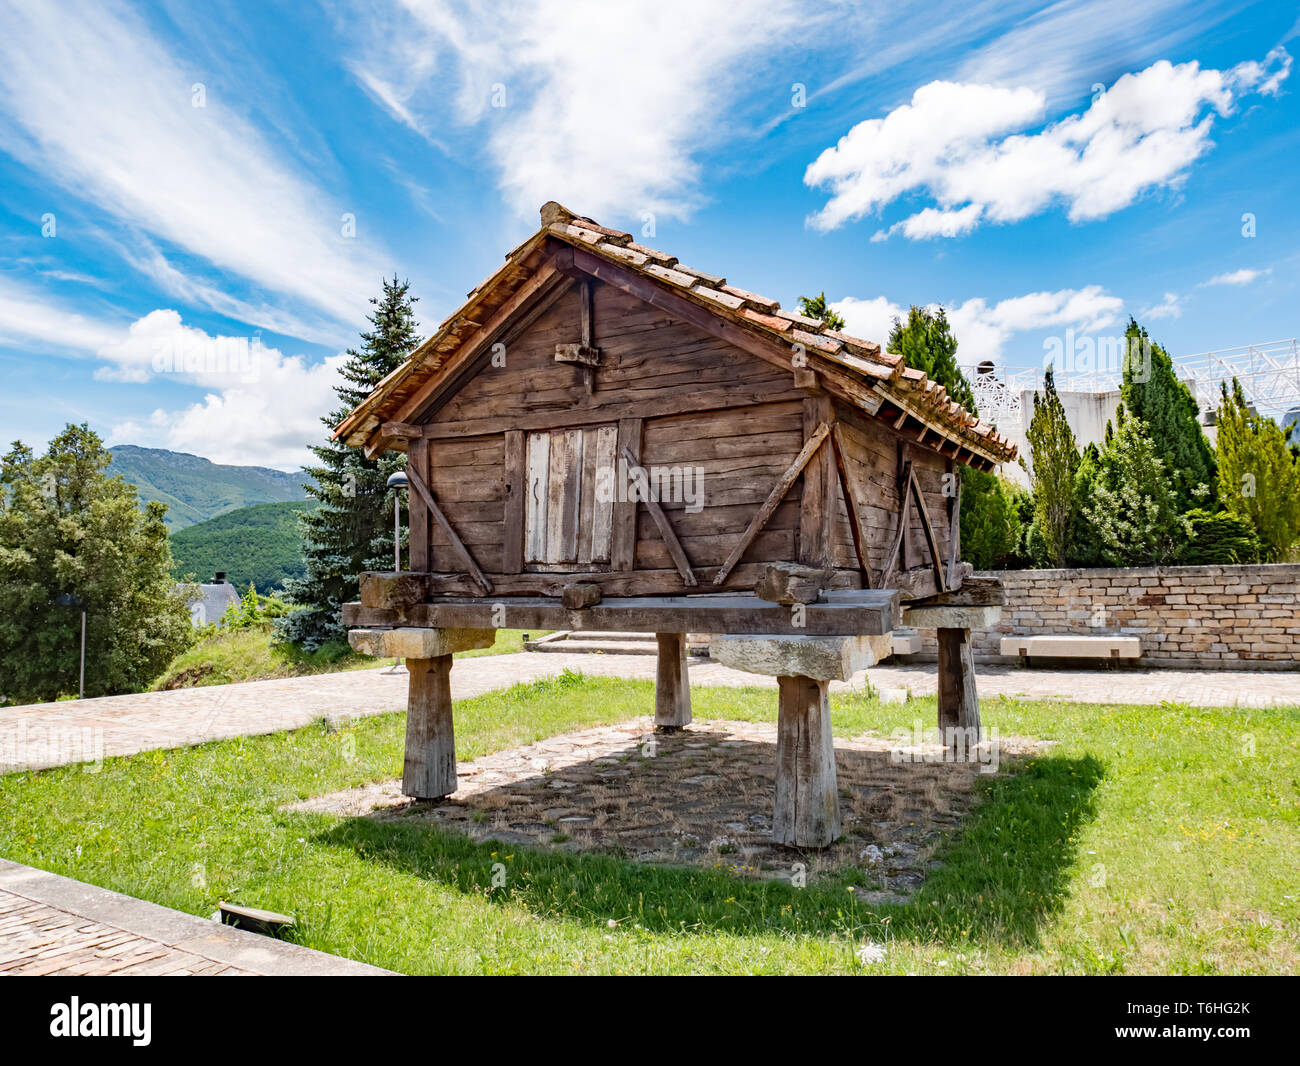 Old wooden Horreo, typical rural construction in Spain. Riano, province of Leon. Castile and Leon, northern Spain Stock Photo